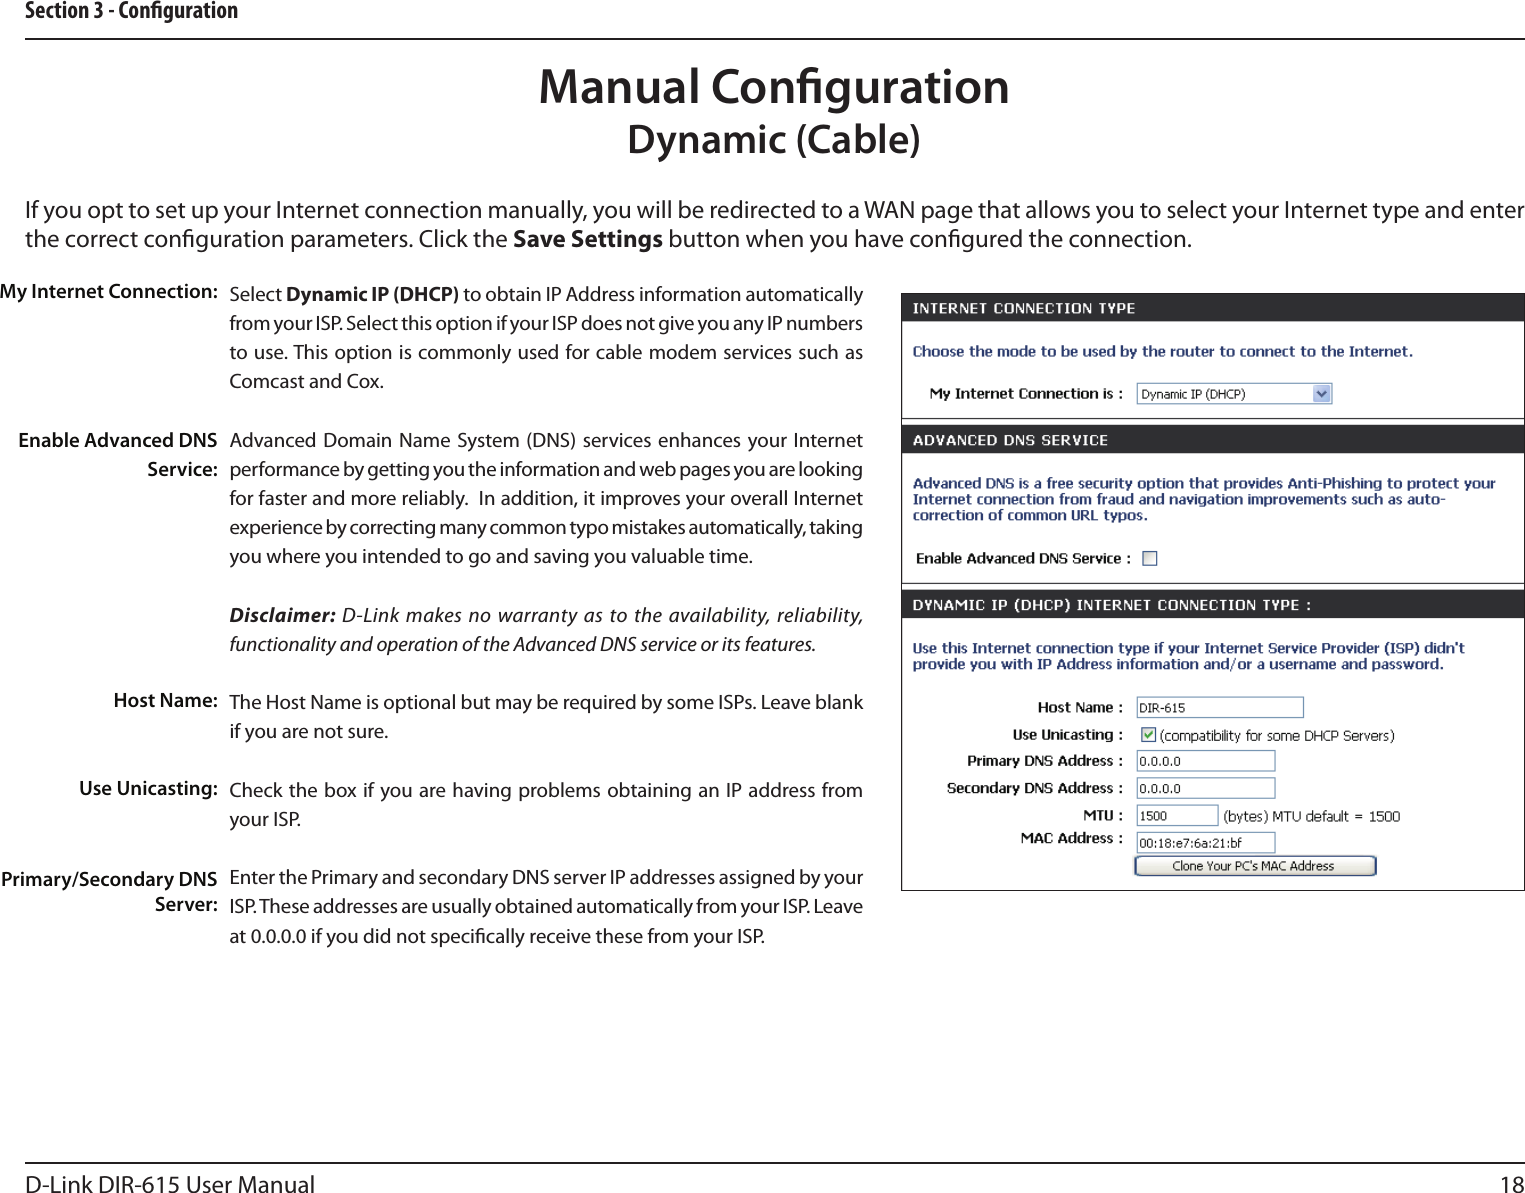 18D-Link DIR-615 User ManualSection 3 - CongurationIf you opt to set up your Internet connection manually, you will be redirected to a WAN page that allows you to select your Internet type and enter the correct conguration parameters. Click the Save Settings button when you have congured the connection.Manual CongurationDynamic (Cable)Select Dynamic IP (DHCP) to obtain IP Address information automatically from your ISP. Select this option if your ISP does not give you any IP numbers to use. This option is commonly used for cable modem services such as Comcast and Cox.Advanced Domain  Name System (DNS)  services enhances  your Internet performance by getting you the information and web pages you are looking for faster and more reliably.  In addition, it improves your overall Internet experience by correcting many common typo mistakes automatically, taking you where you intended to go and saving you valuable time.Disclaimer: D-Link makes no warranty as to the availability, reliability, functionality and operation of the Advanced DNS service or its features.The Host Name is optional but may be required by some ISPs. Leave blank if you are not sure.Check the box if you are having problems obtaining an IP address from your ISP.Enter the Primary and secondary DNS server IP addresses assigned by your ISP. These addresses are usually obtained automatically from your ISP. Leave at 0.0.0.0 if you did not specically receive these from your ISP.My Internet Connection:Enable Advanced DNS Service:Host Name:Use Unicasting:Primary/Secondary DNS Server: